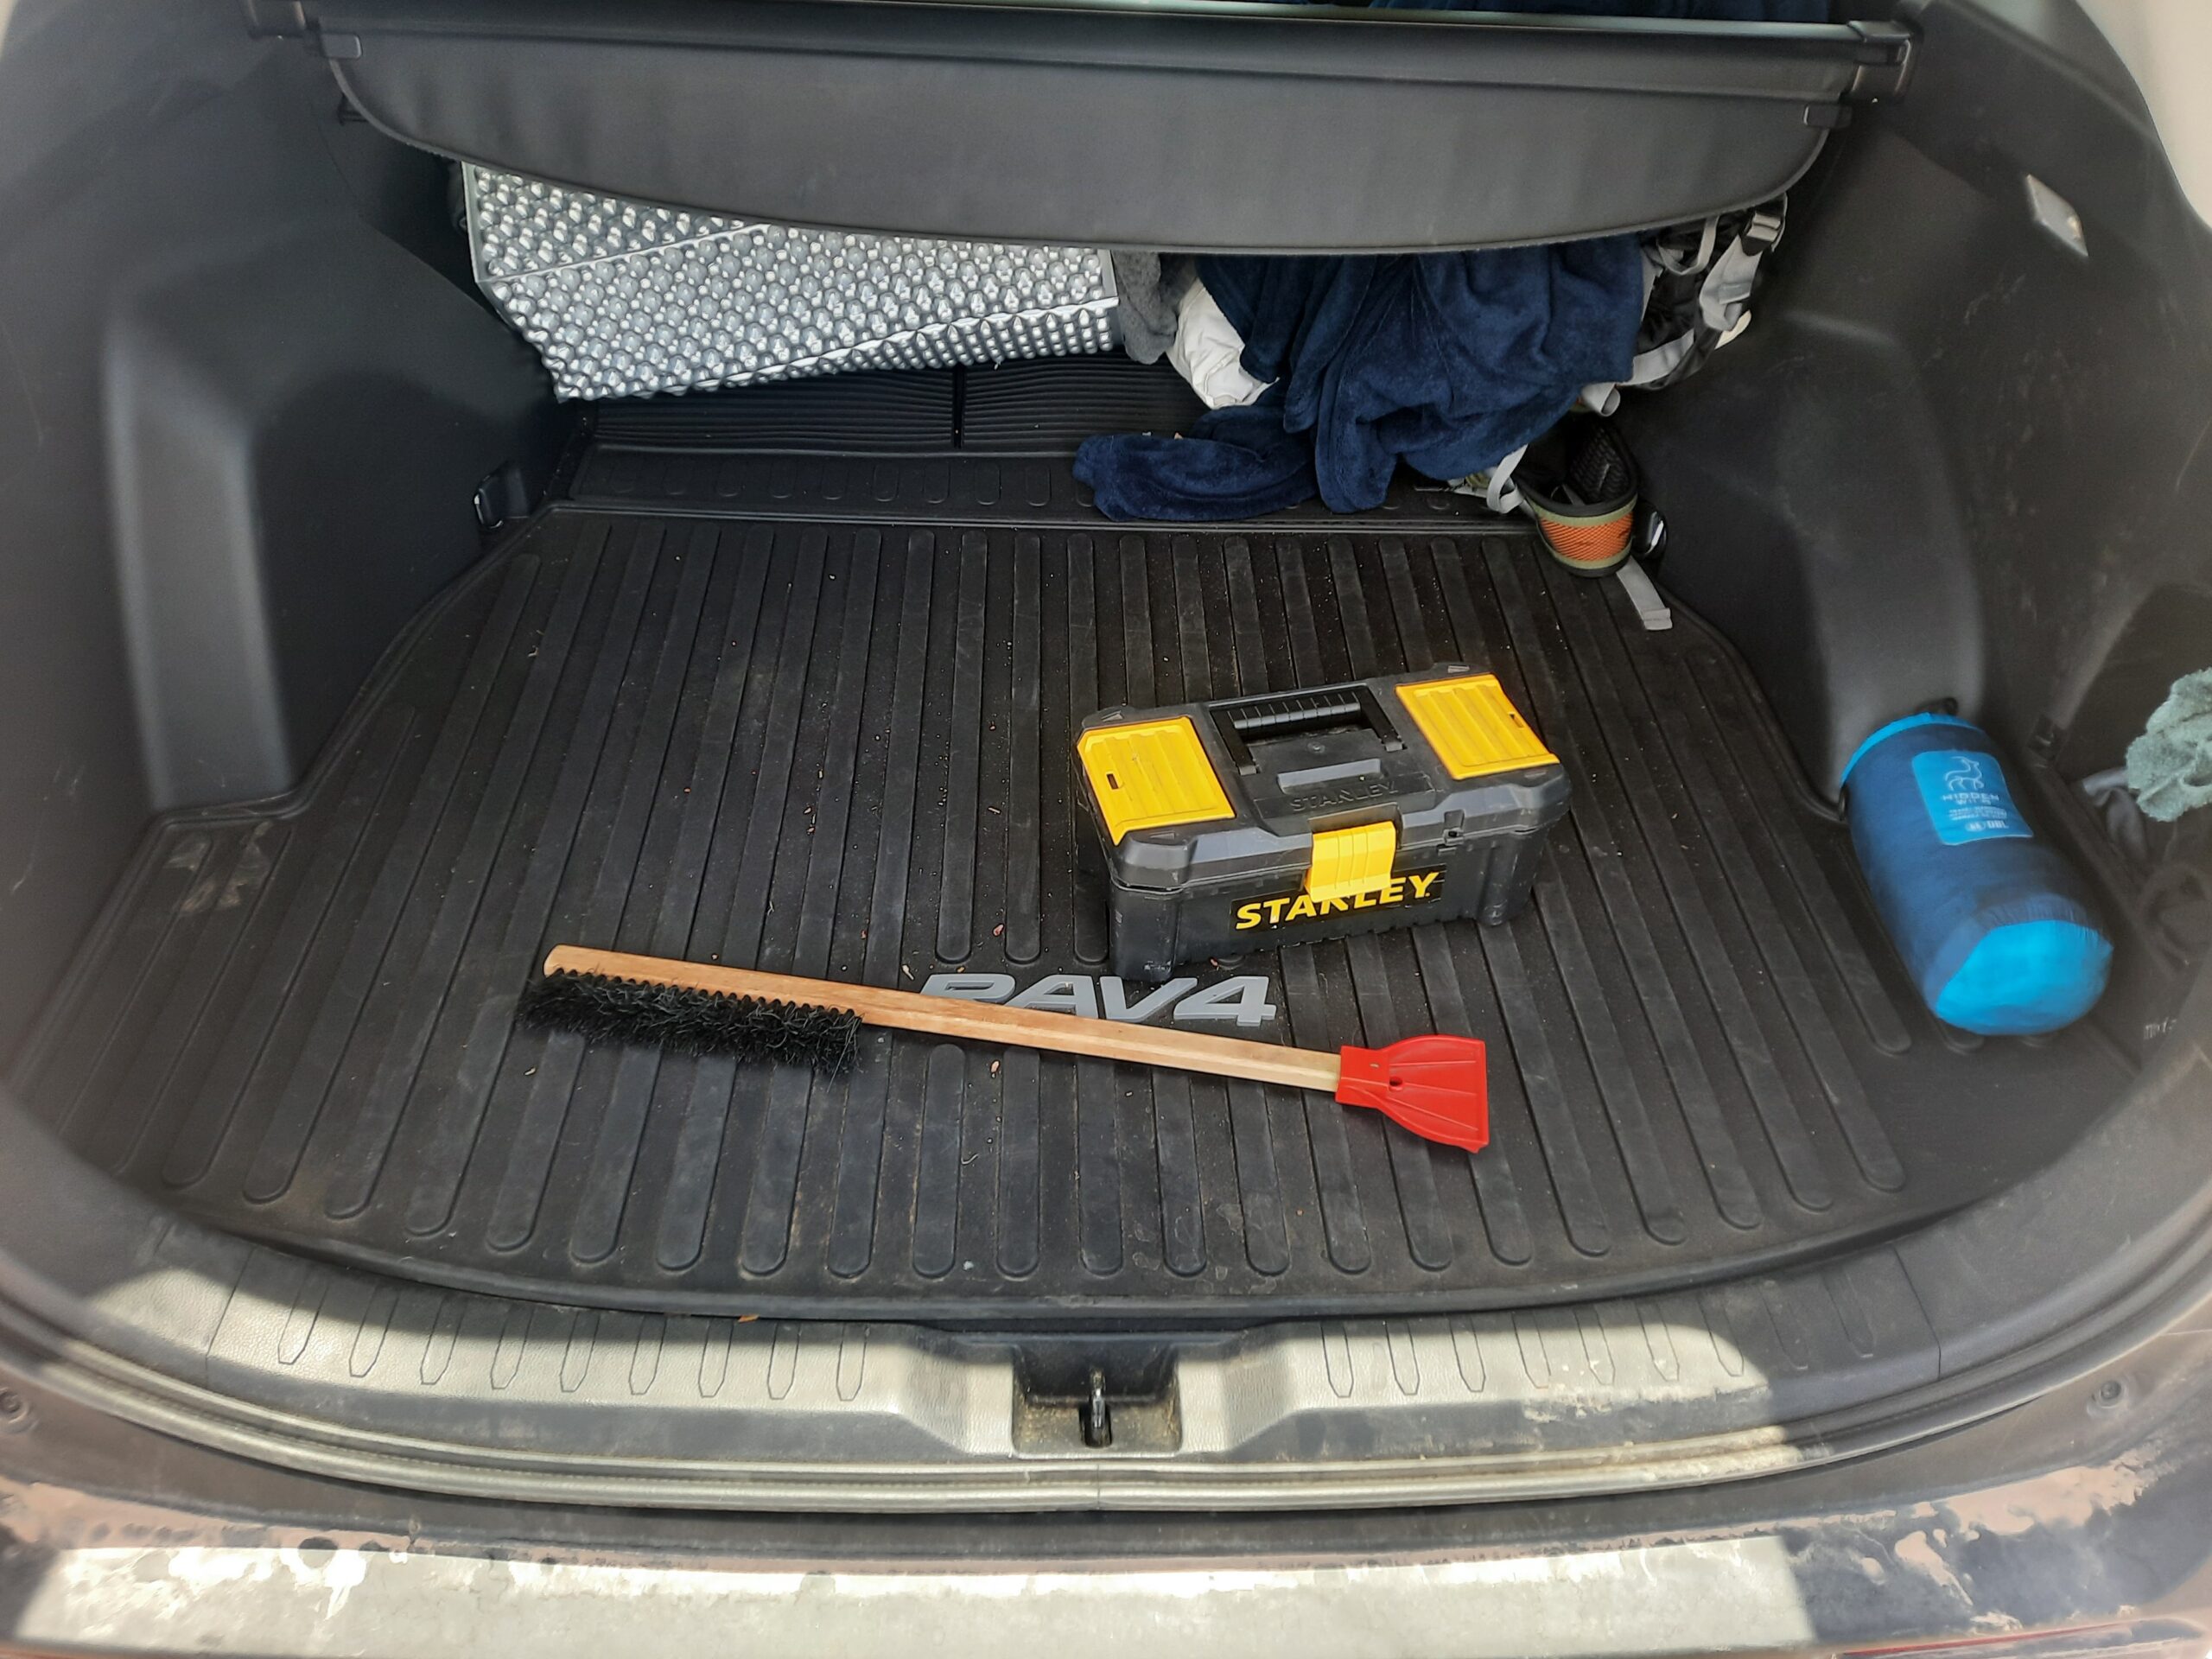 removing items from the rear cargo area